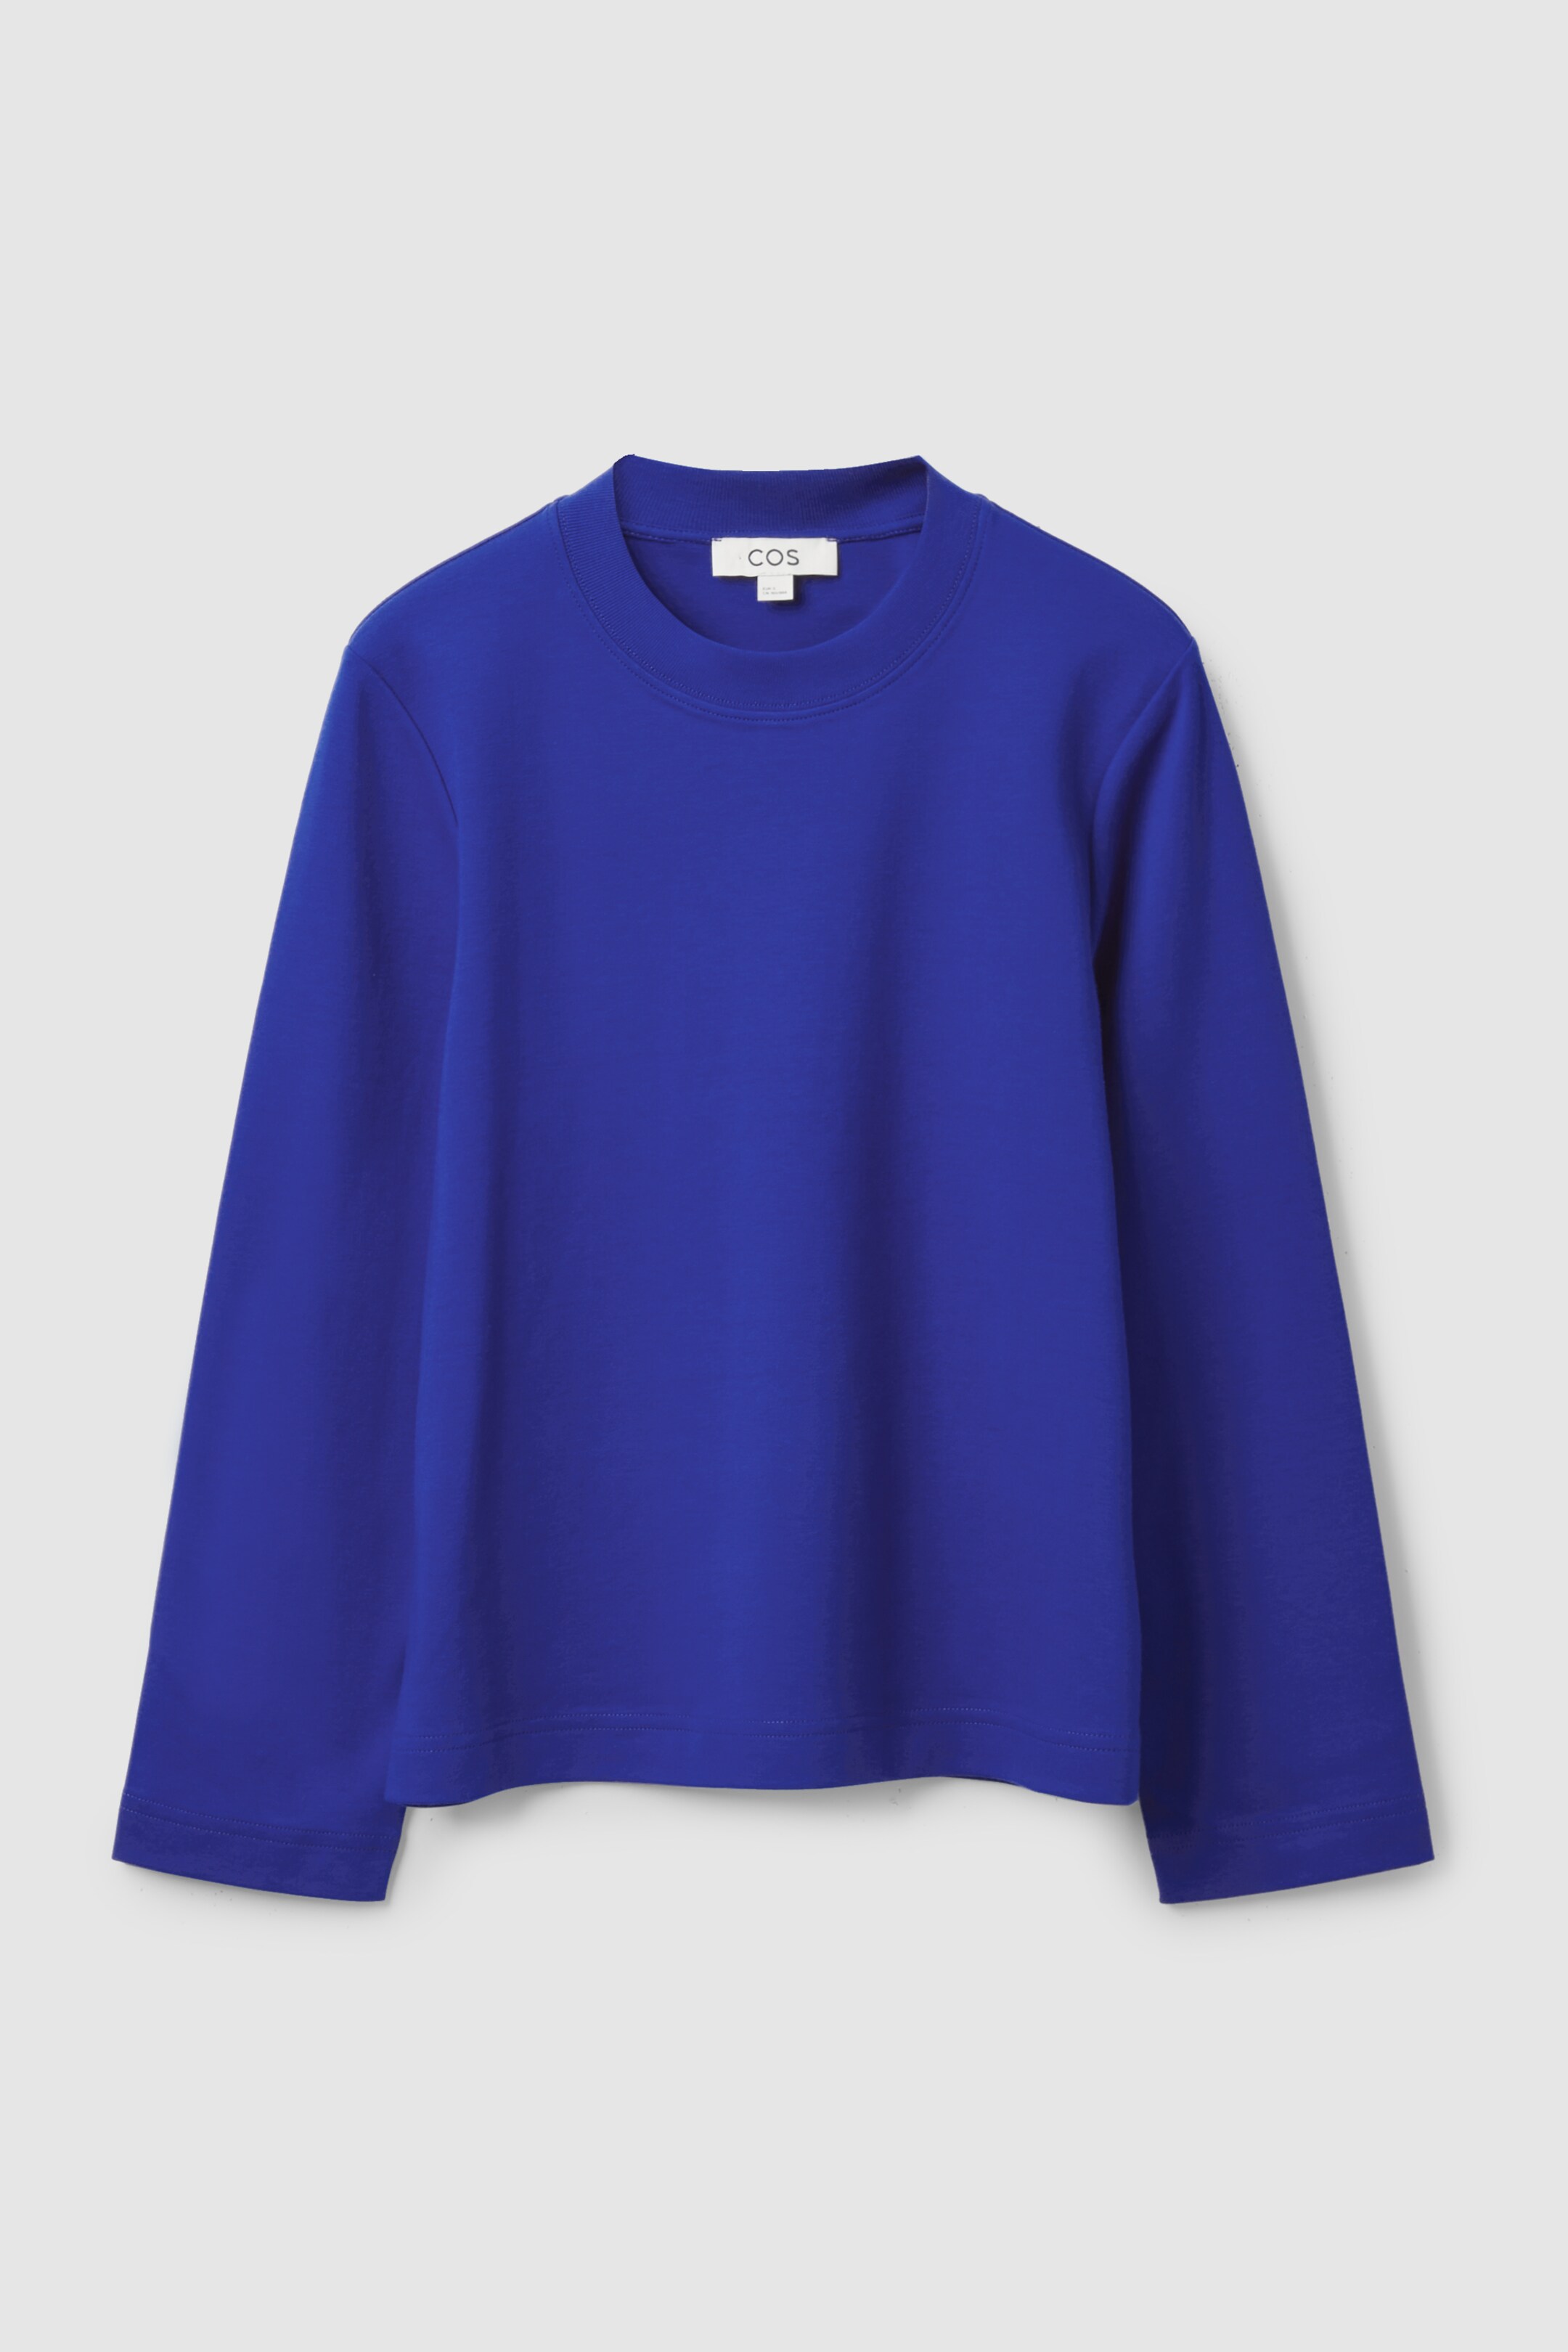 Front image of cos SLIM-FIT HEAVYWEIGHT LONG-SLEEVED T-SHIRT in BLUE